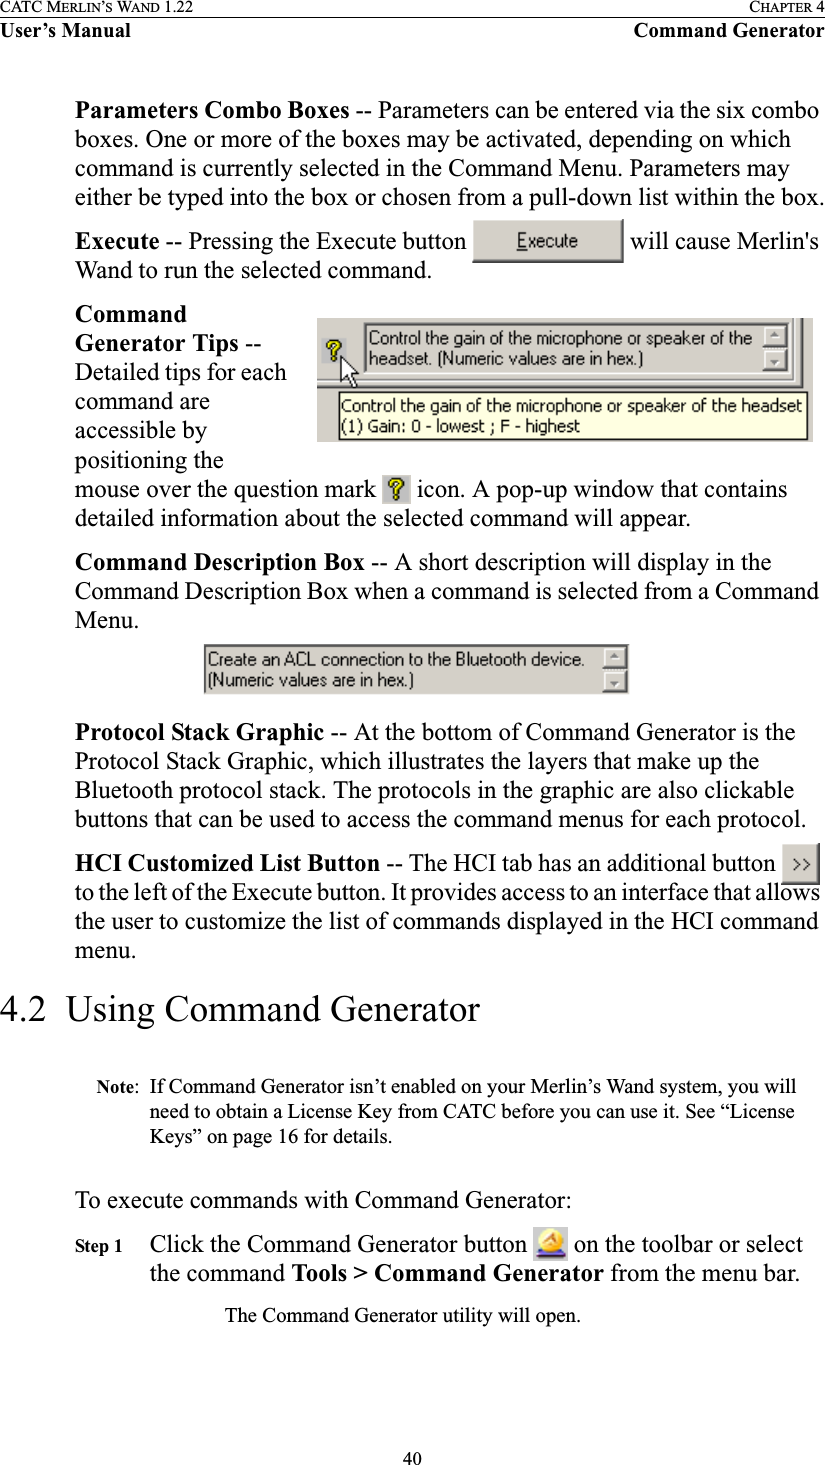 40CATC MERLIN’S WAND 1.22 CHAPTER 4User’s Manual Command GeneratorParameters Combo Boxes -- Parameters can be entered via the six combo boxes. One or more of the boxes may be activated, depending on which command is currently selected in the Command Menu. Parameters may either be typed into the box or chosen from a pull-down list within the box.Execute -- Pressing the Execute button   will cause Merlin&apos;s Wand to run the selected command.Command Generator Tips -- Detailed tips for each command are accessible by positioning the mouse over the question mark   icon. A pop-up window that contains detailed information about the selected command will appear.Command Description Box -- A short description will display in the Command Description Box when a command is selected from a Command Menu.Protocol Stack Graphic -- At the bottom of Command Generator is the Protocol Stack Graphic, which illustrates the layers that make up the Bluetooth protocol stack. The protocols in the graphic are also clickable buttons that can be used to access the command menus for each protocol.HCI Customized List Button -- The HCI tab has an additional button   to the left of the Execute button. It provides access to an interface that allows the user to customize the list of commands displayed in the HCI command menu.4.2  Using Command GeneratorNote: If Command Generator isn’t enabled on your Merlin’s Wand system, you will need to obtain a License Key from CATC before you can use it. See “License Keys” on page 16 for details. To execute commands with Command Generator:Step 1 Click the Command Generator button   on the toolbar or select the command Tools &gt; Command Generator from the menu bar.The Command Generator utility will open.  